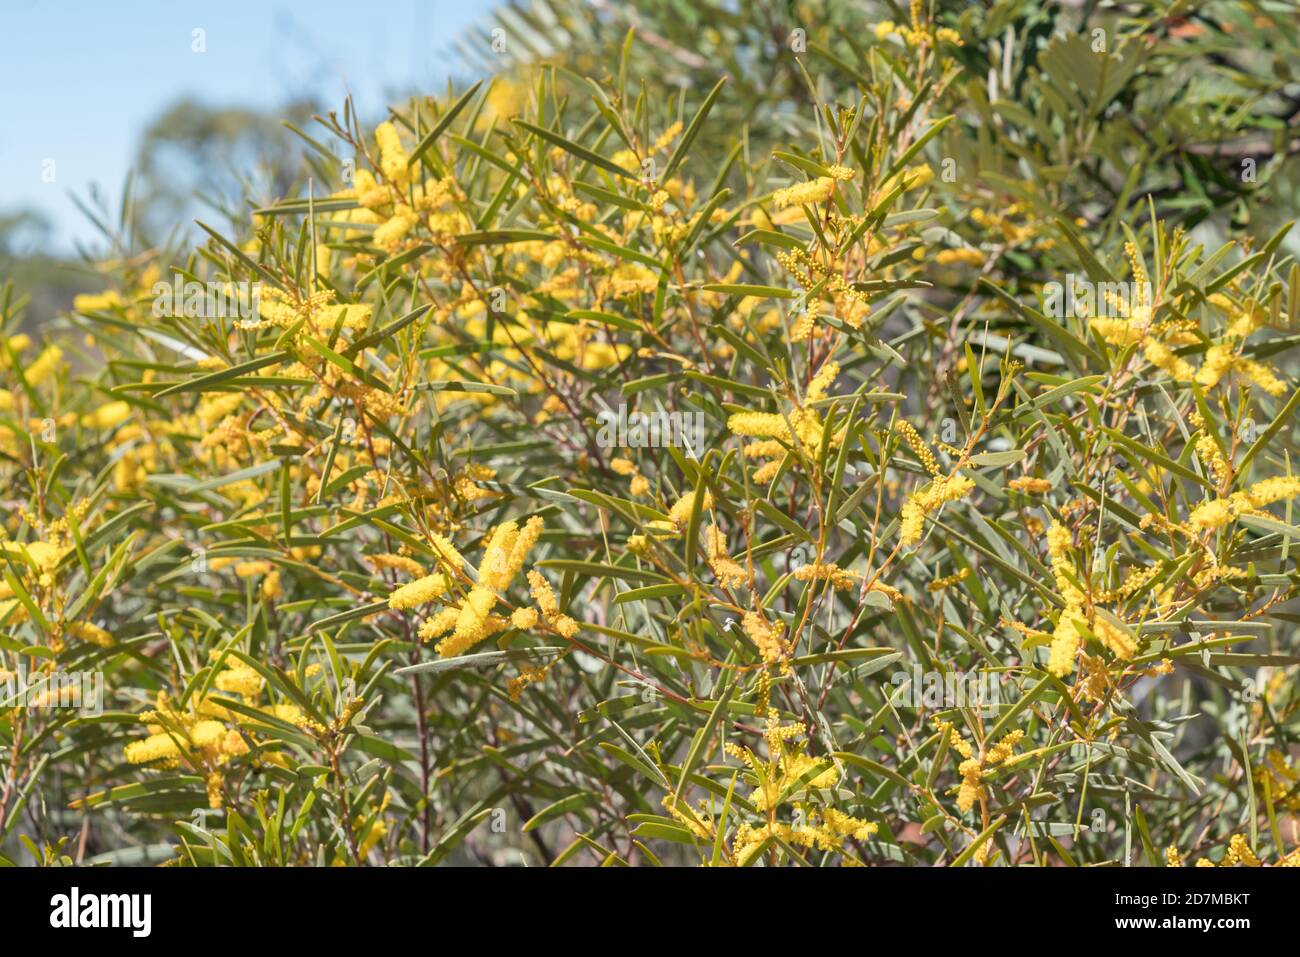 Acacia or wattle in flower near Sawpit Gorge in White Mountain National Park, Queensland Stock Photo